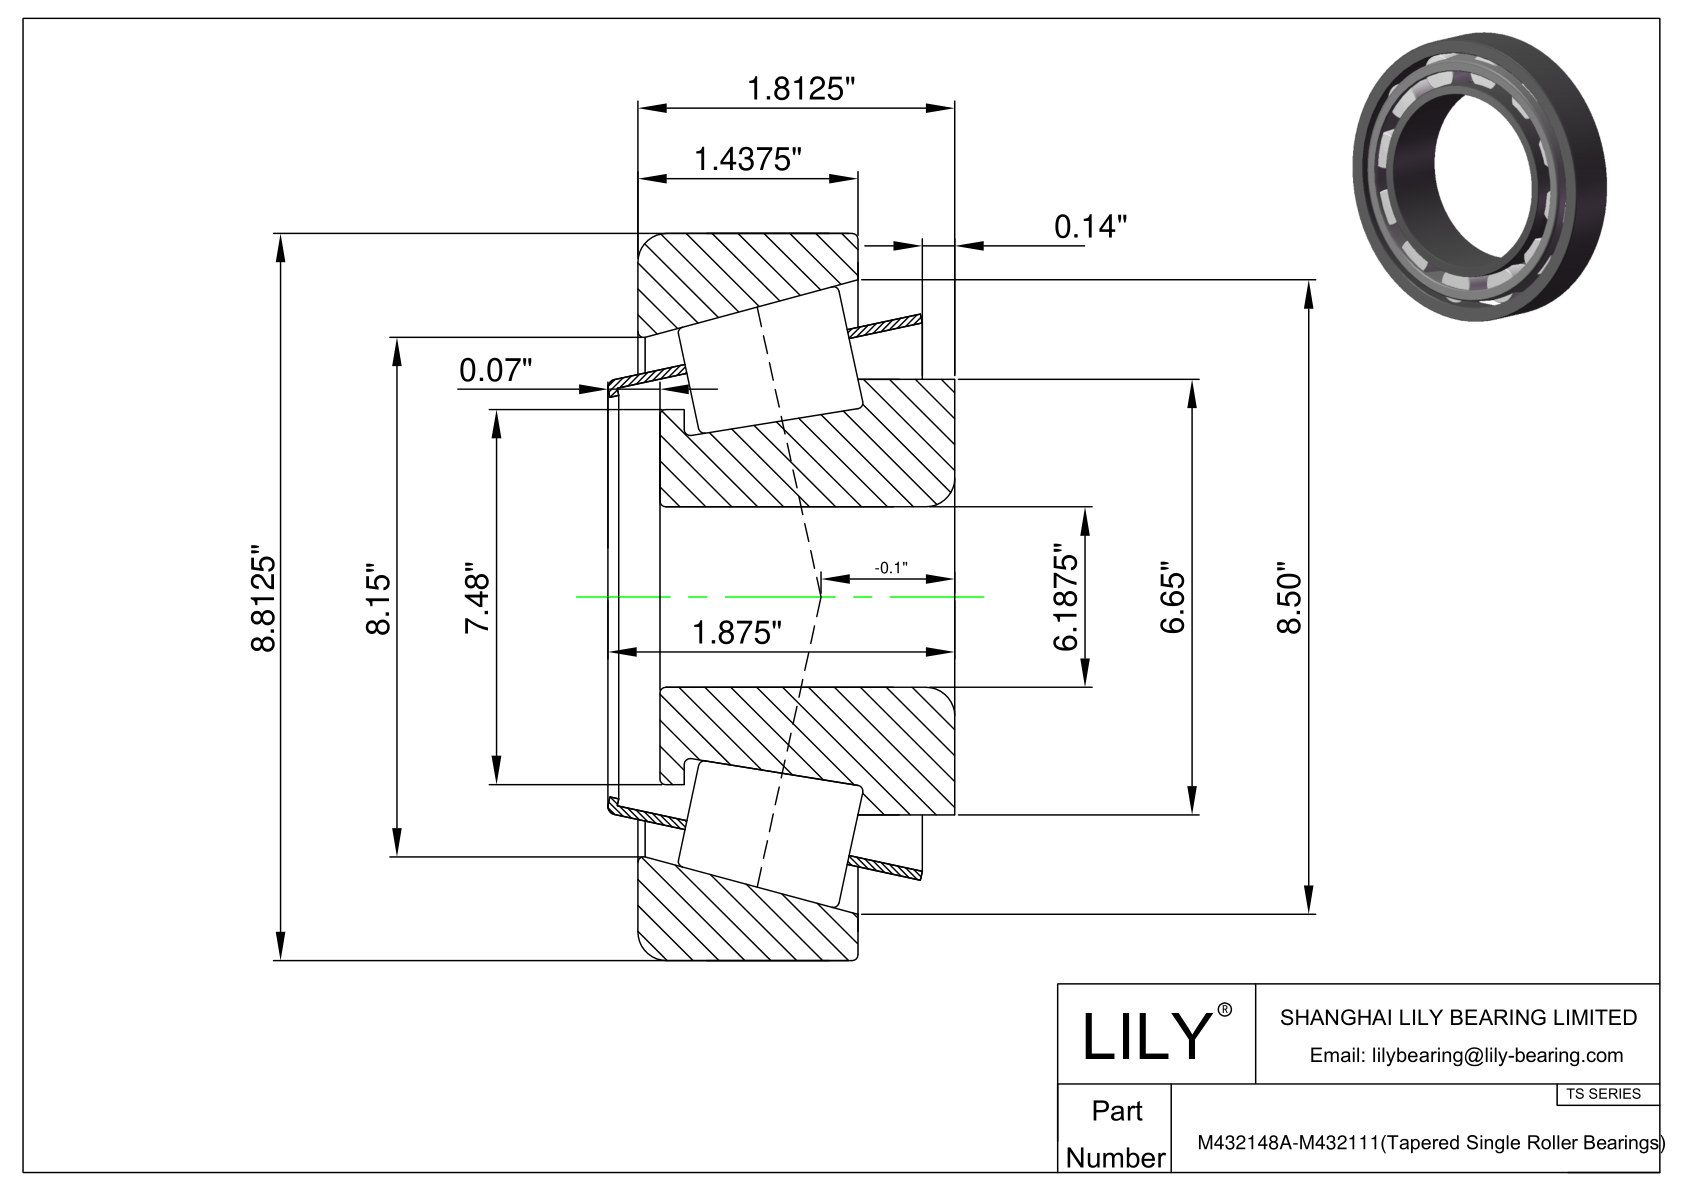 M432148A-M432111 TS (Tapered Single Roller Bearings) (Imperial) cad drawing